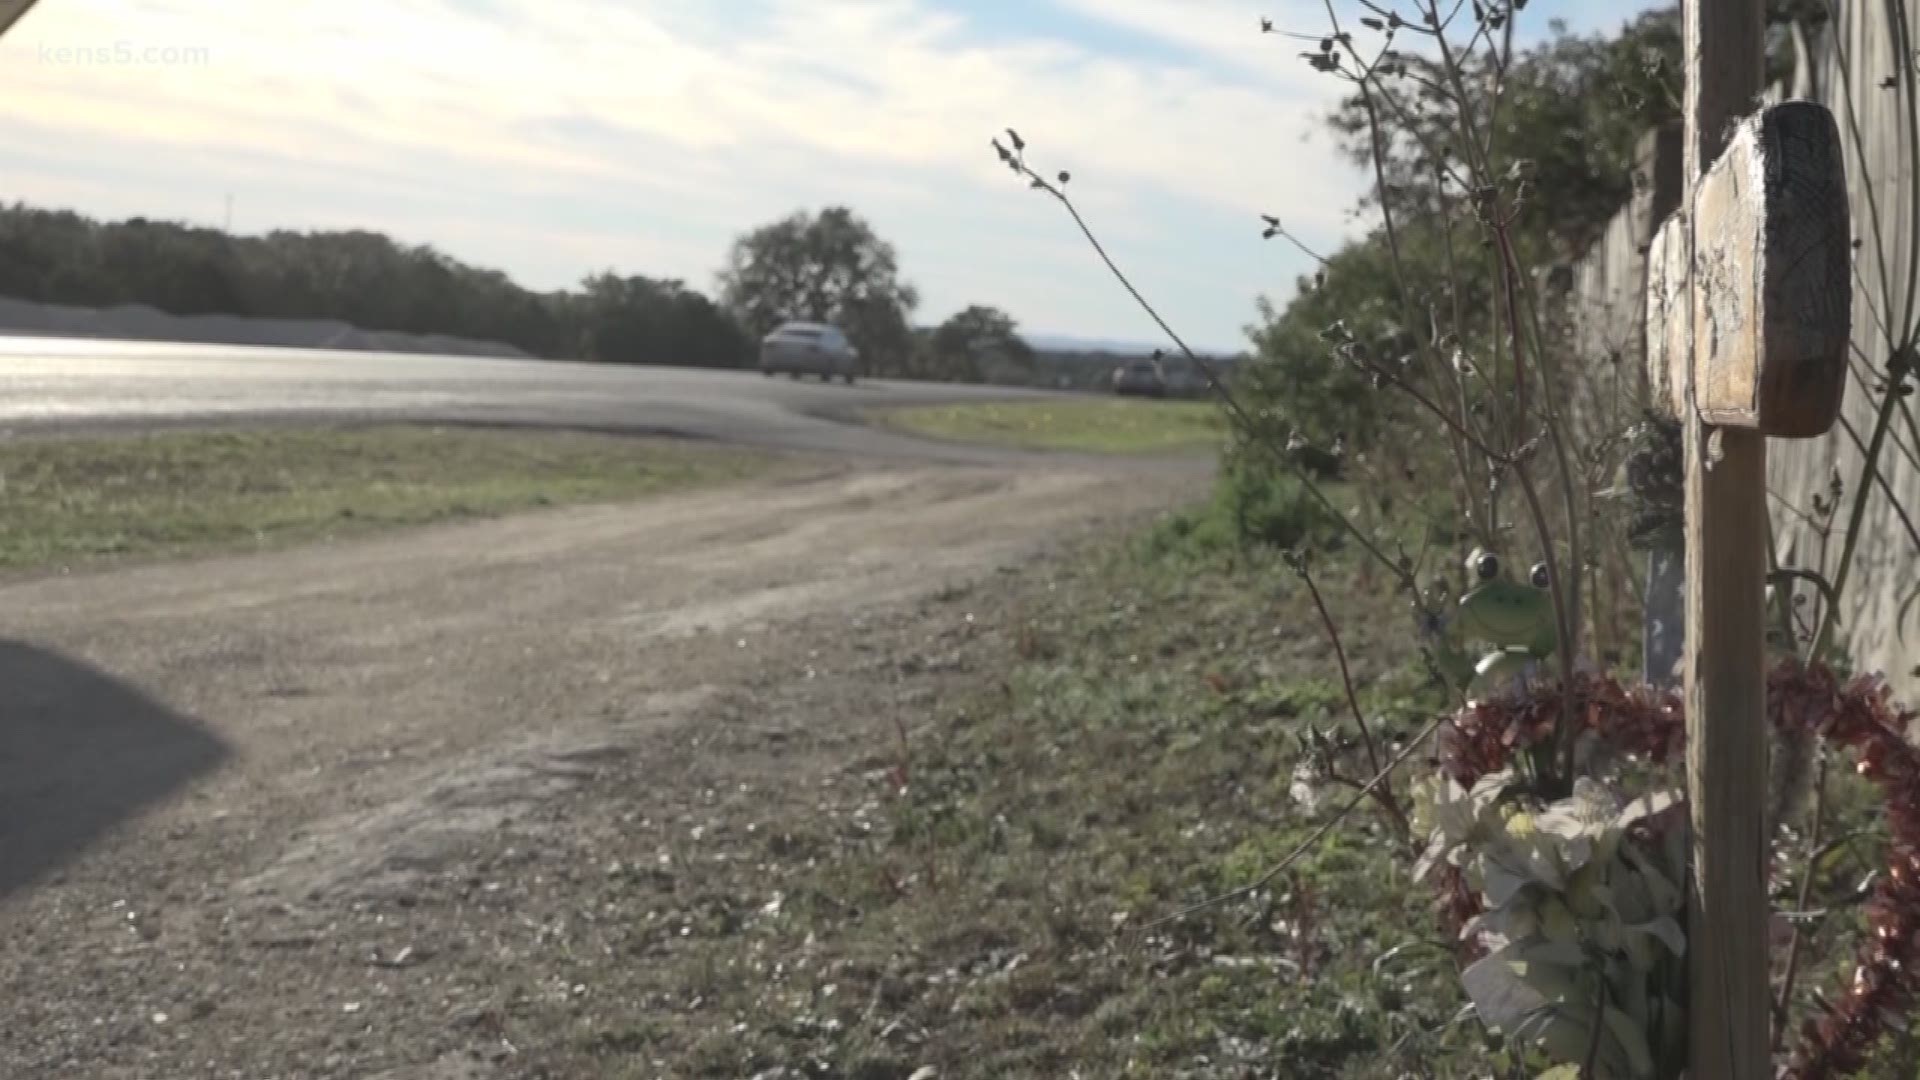 20 people have been killed on Highway 16 between Helotes and Bandera since 2014.